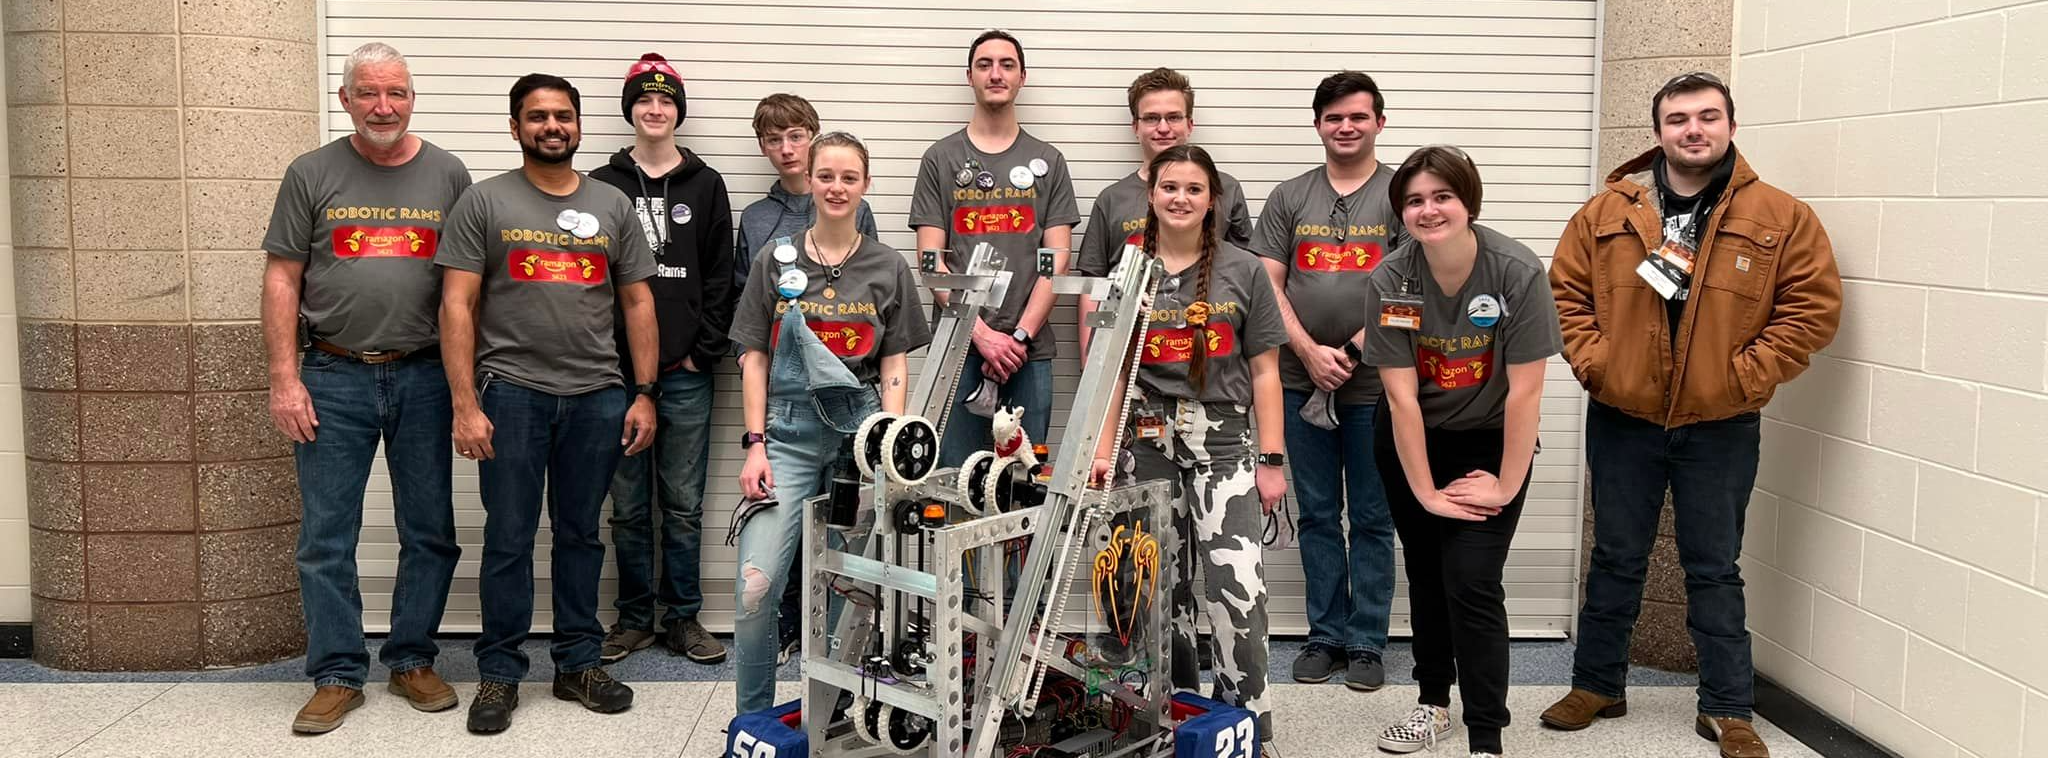 The Robotic Rams team of High School students standing behind the robot they made. The robot has four wheels and is silver.